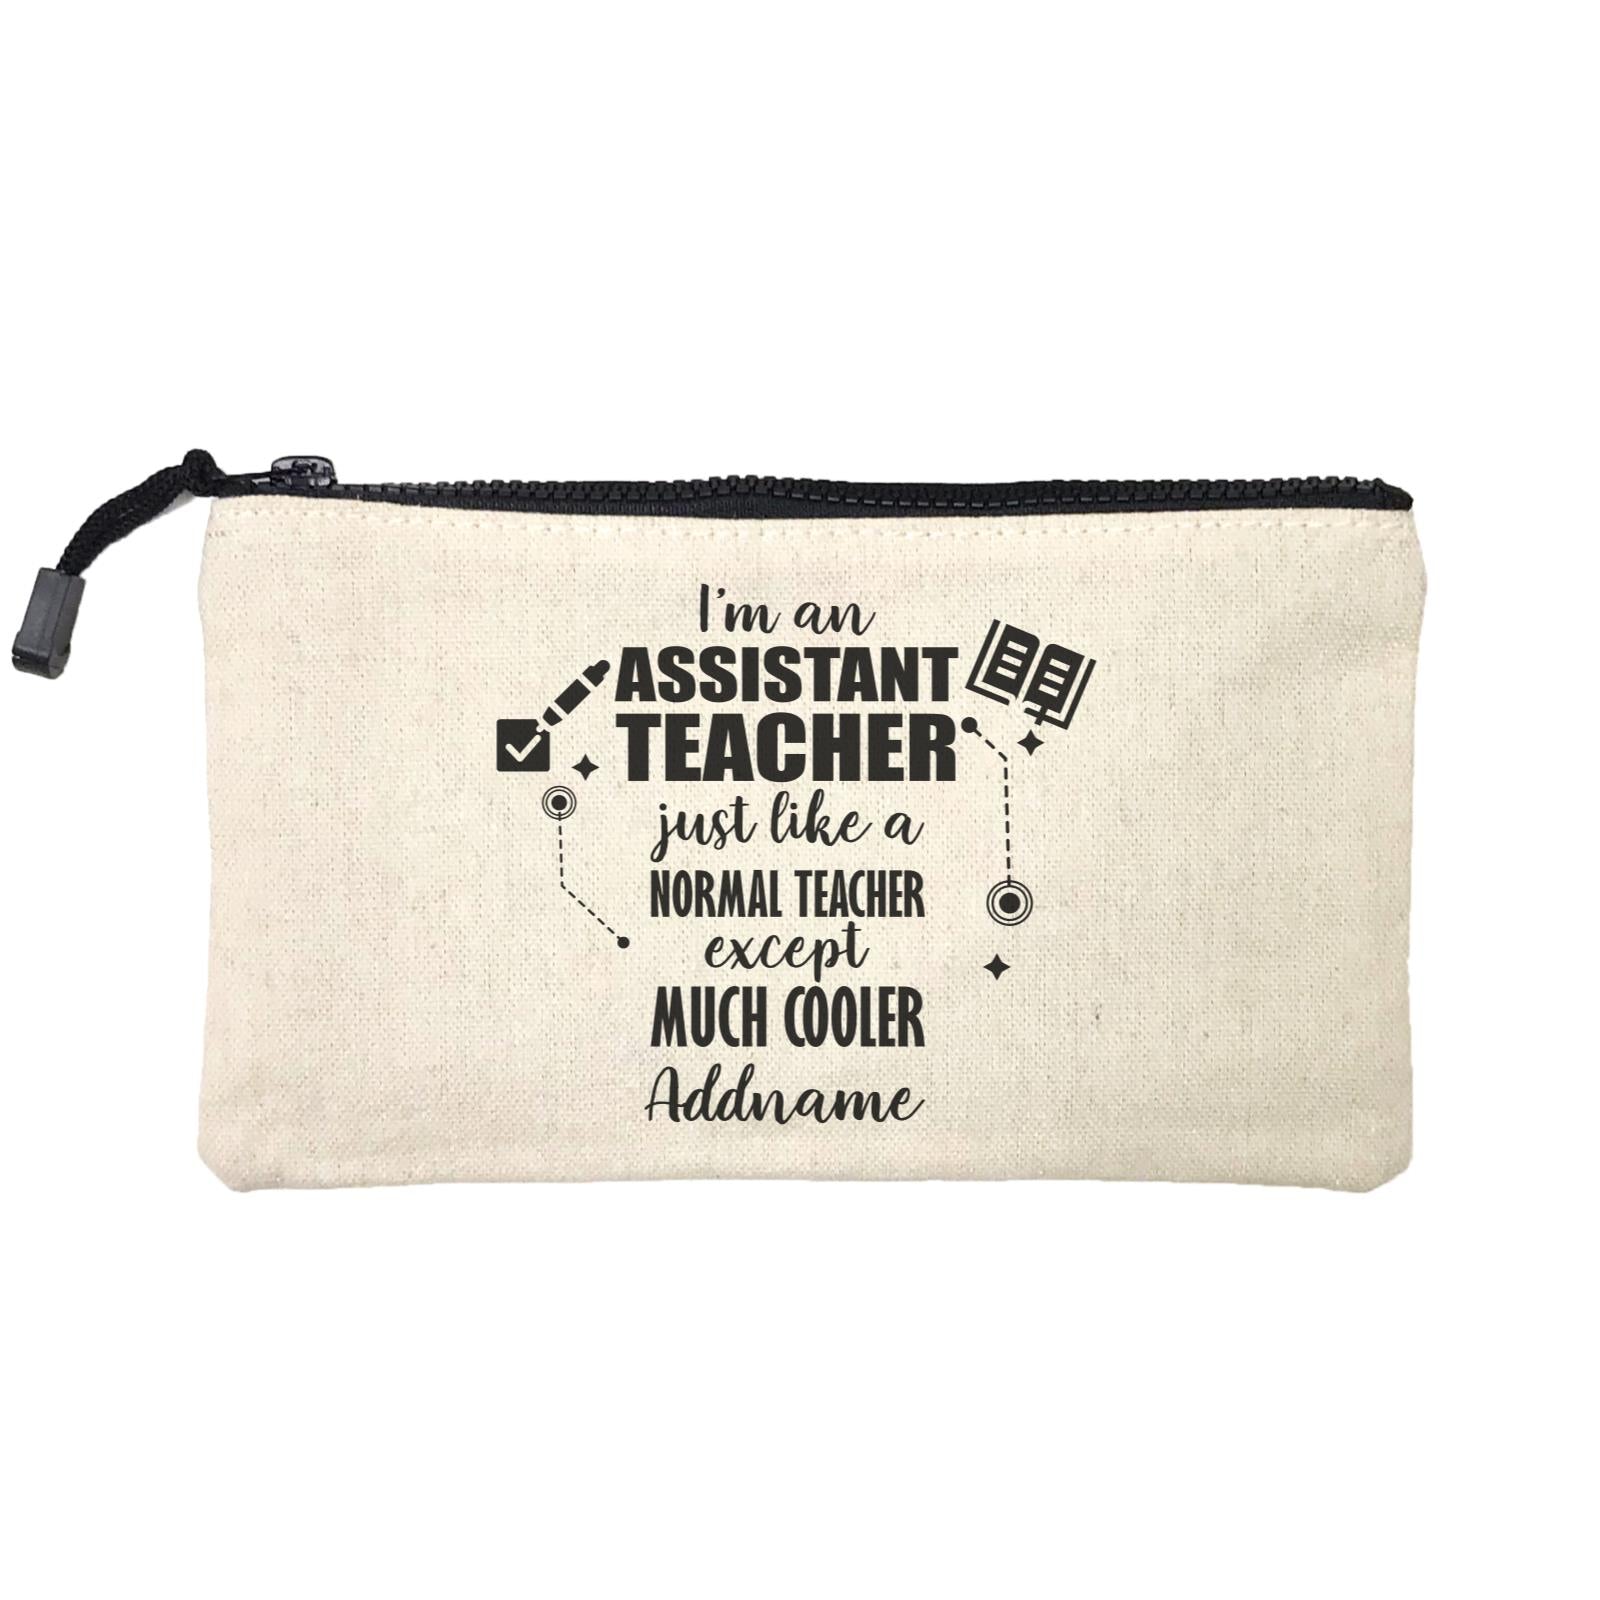 Subject Teachers I'm An Assistant Teacher Addname Mini Accessories Stationery Pouch